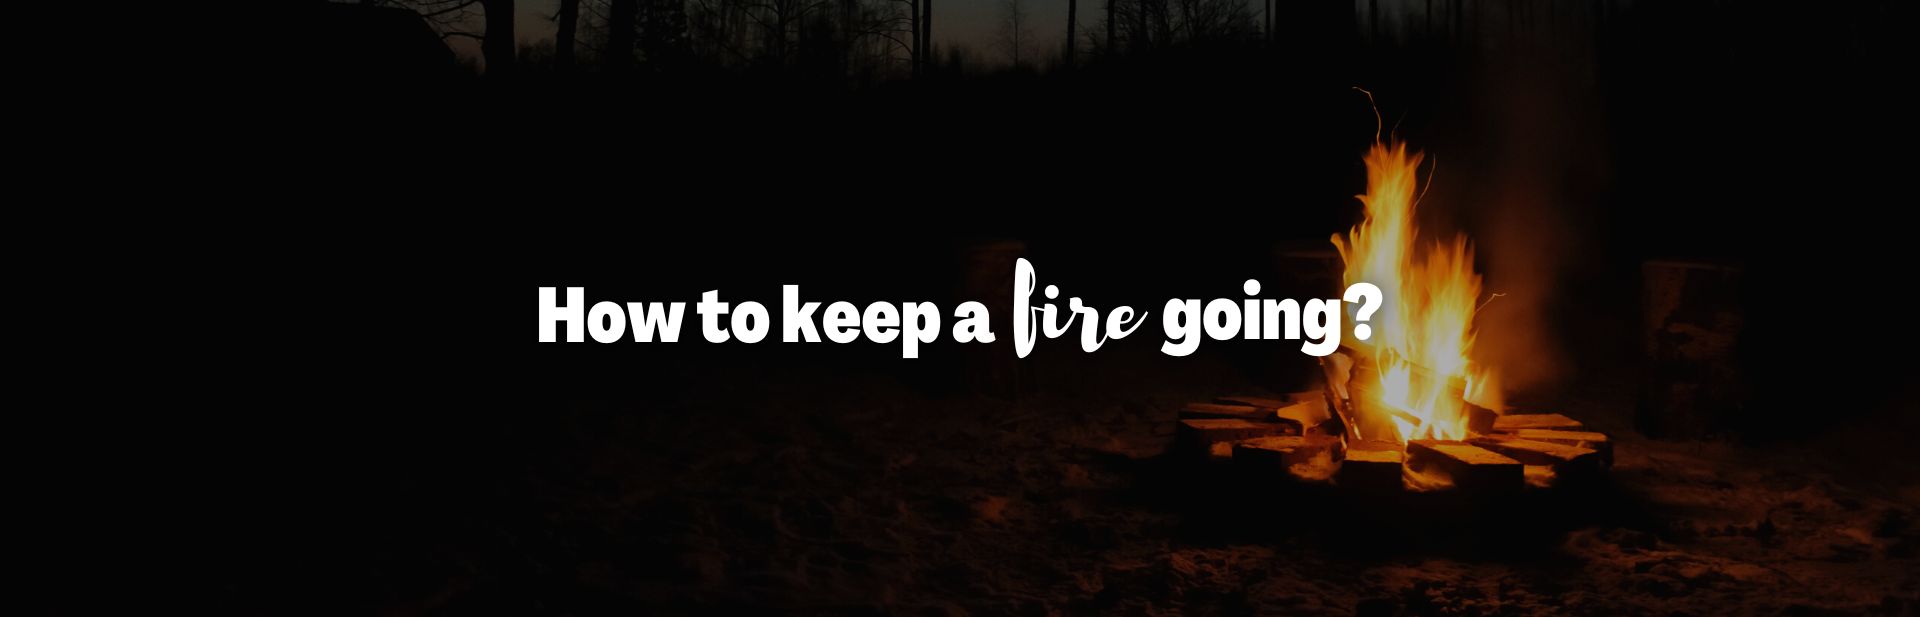 Staying Warm in Winter: How to Keep a Fire Going As Long As You Want!